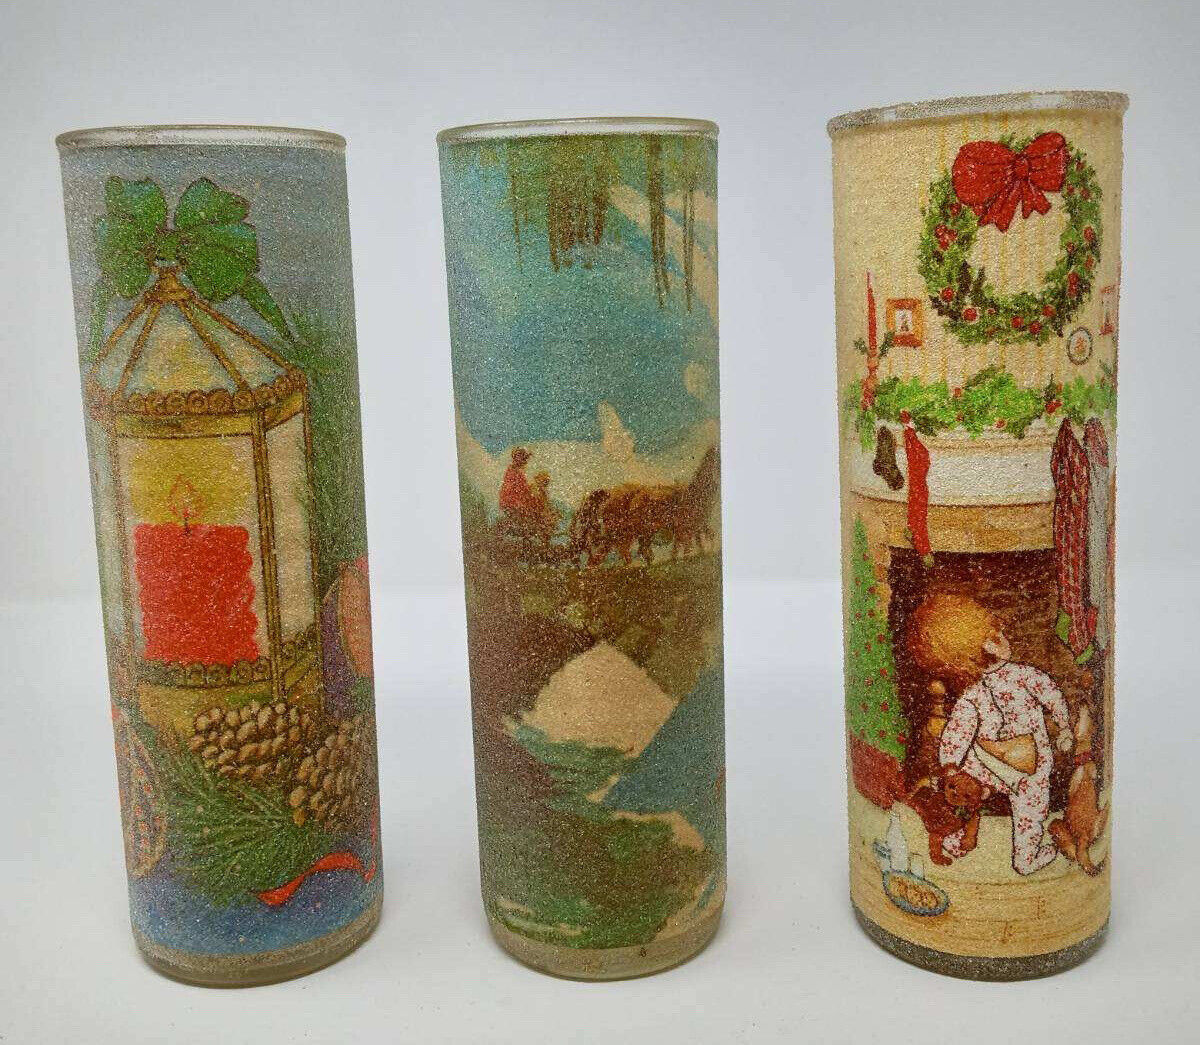 9” Tall Vintage Sugar Frosted Christmas Candles Set Of 3